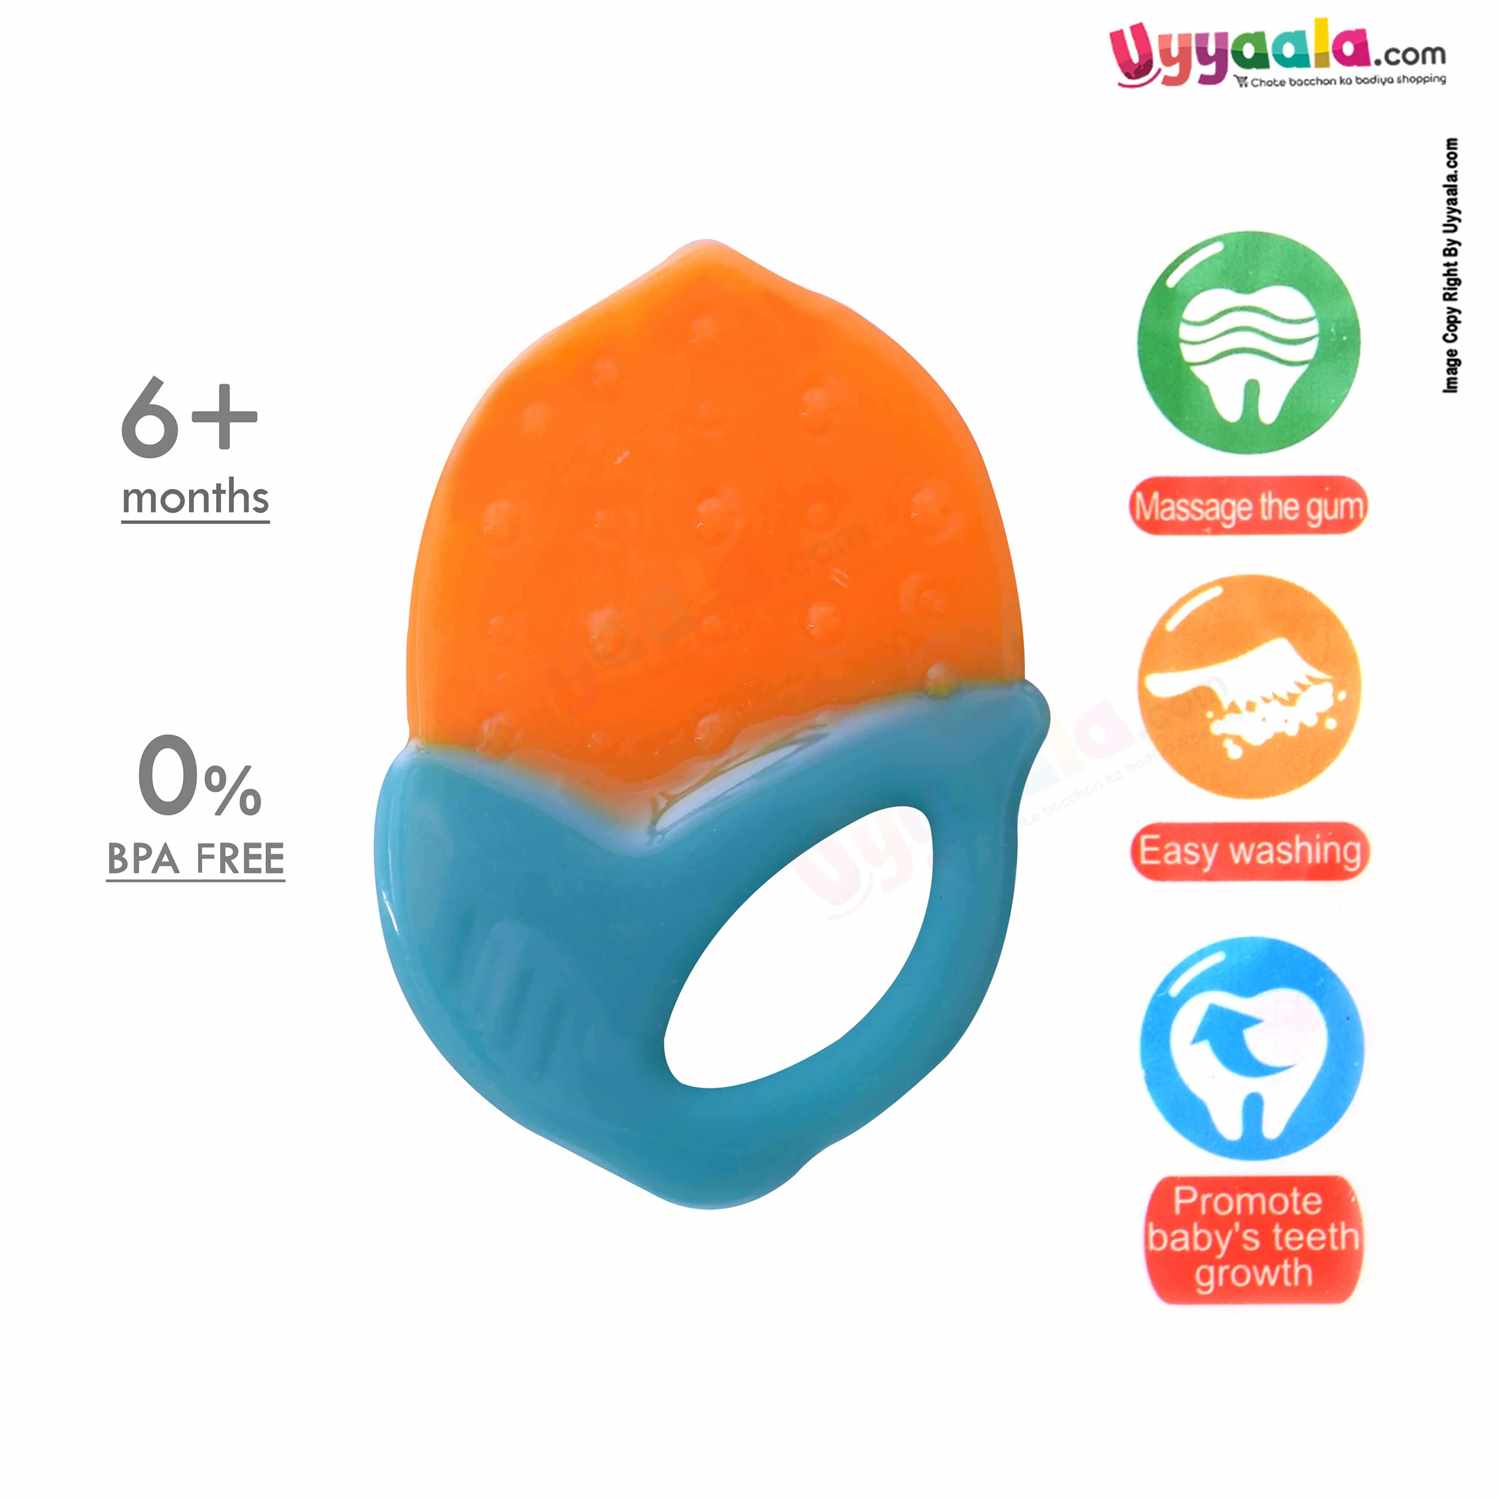 MUMLOVE Massage Silicone Baby Teether for Babies 6+m Age - Blue, Orange